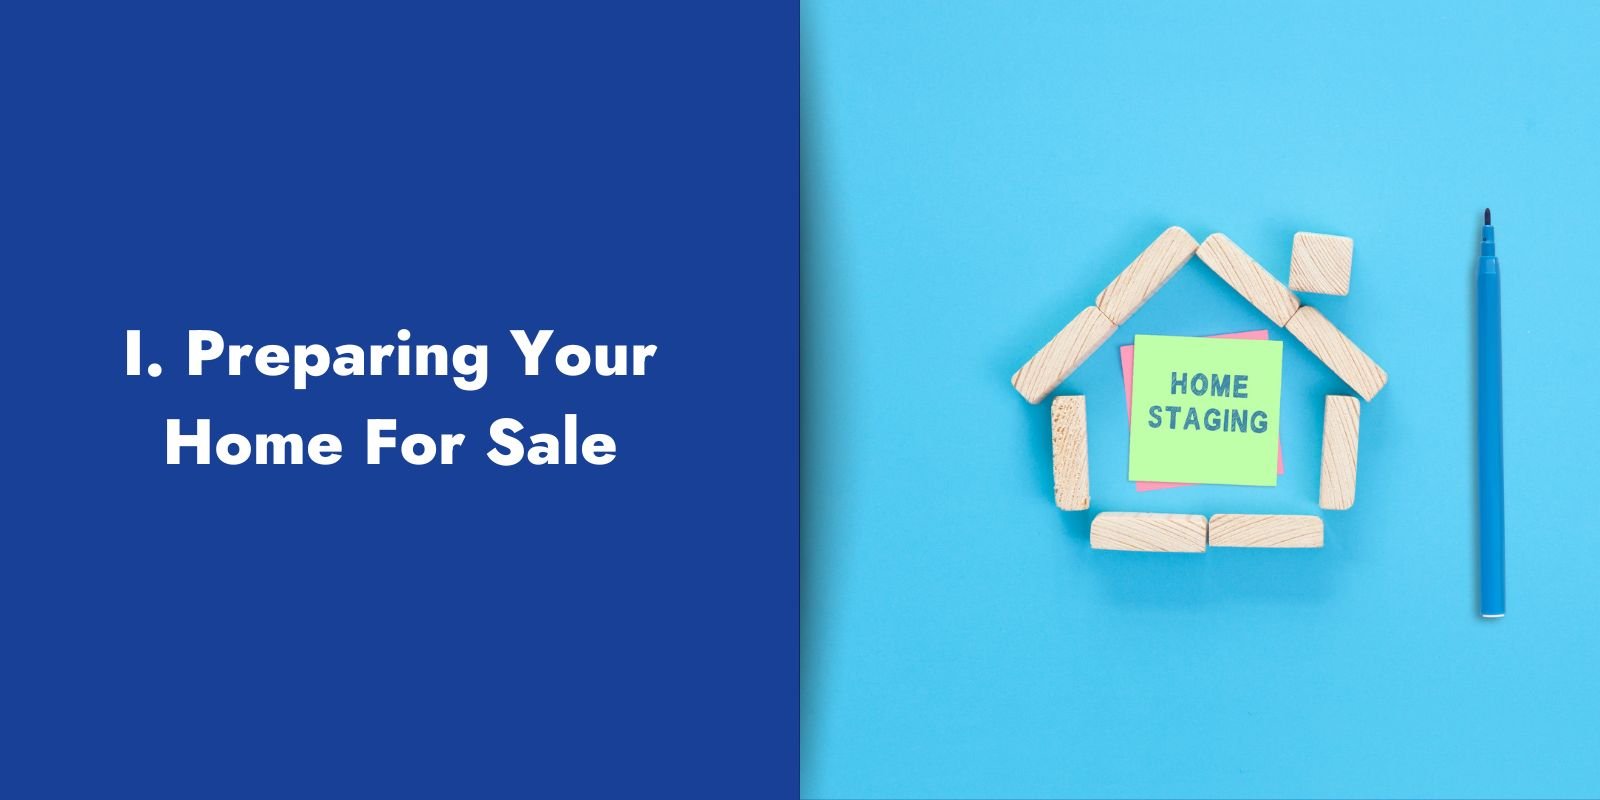 I. Preparing Your Home For Sale